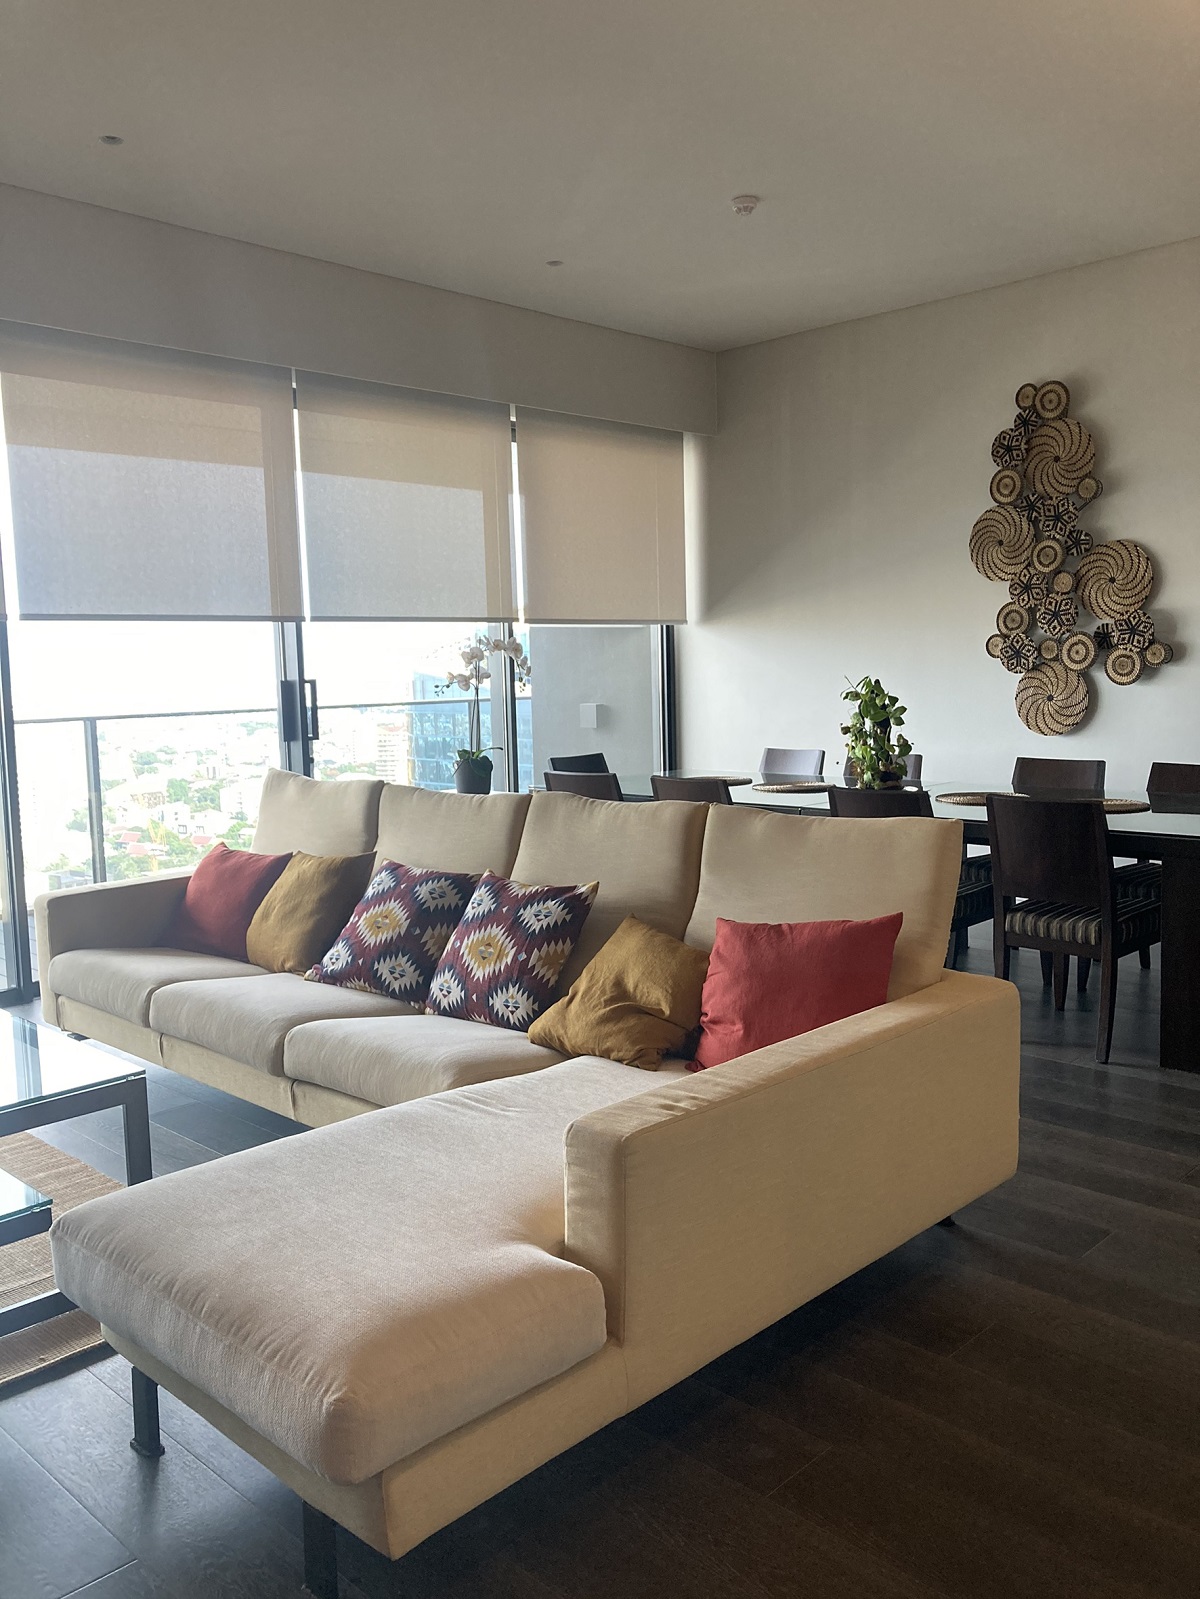 Luxury flat for rent in Thonglor - 2-bedroom - big balcony - private lift - Tela Thonglor